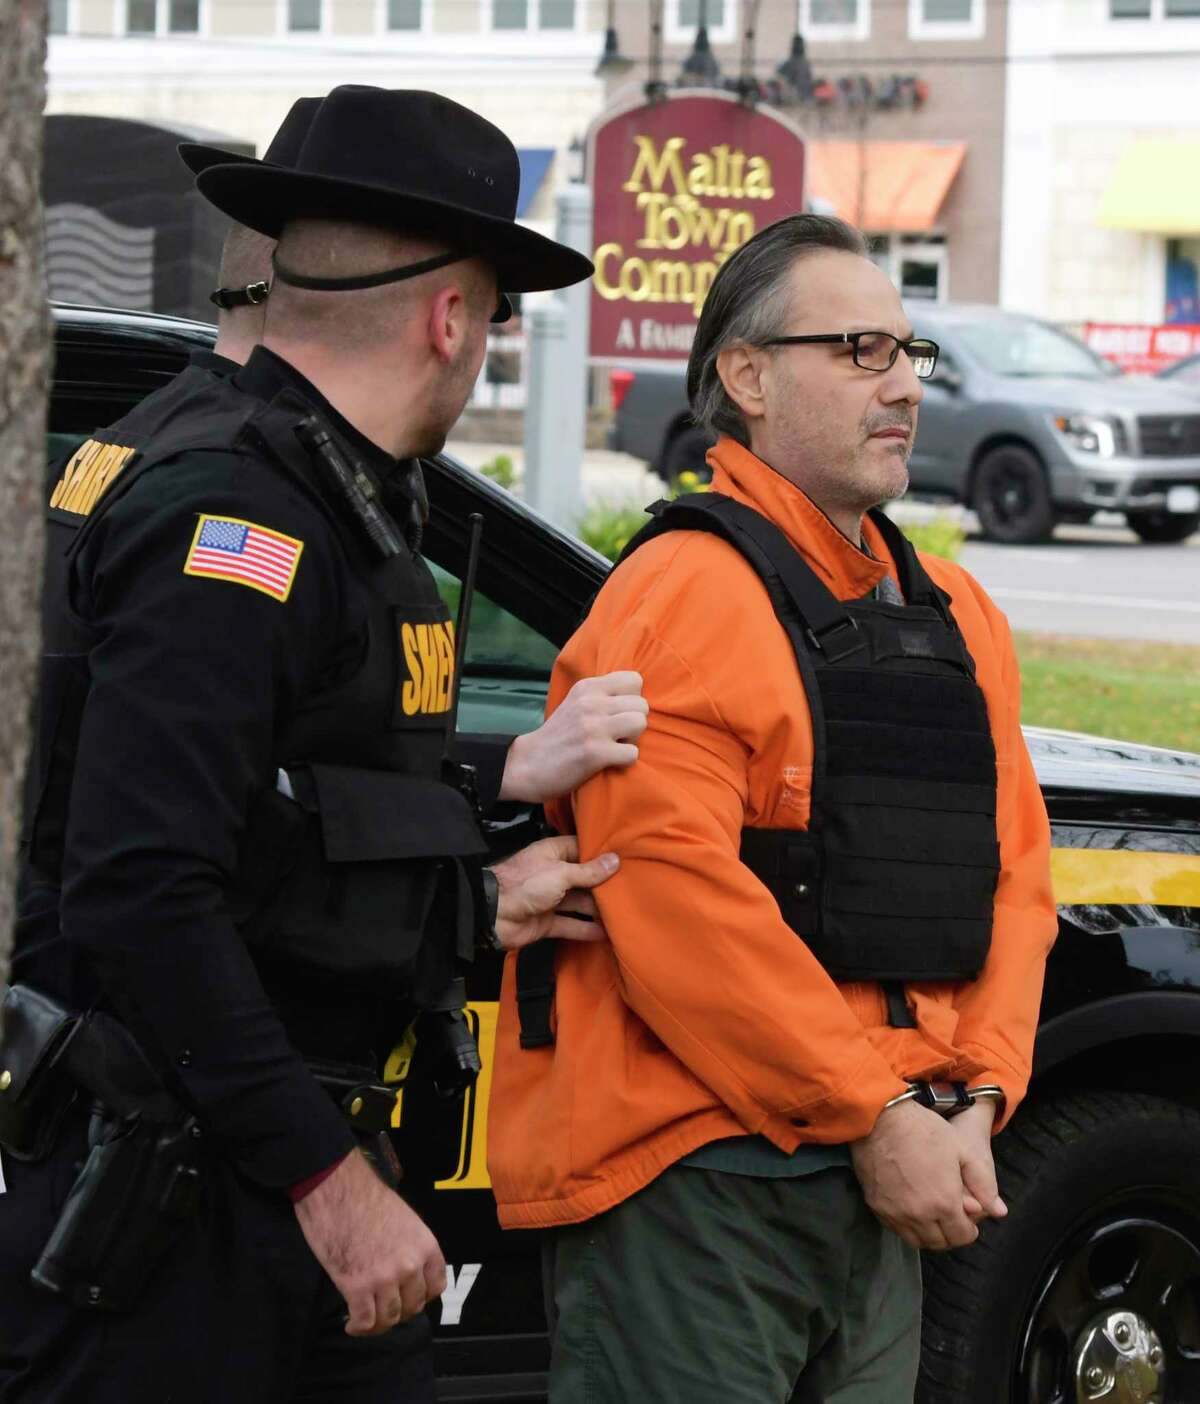 Georgios Kakavelos is brought into Malta Town Court for a court appearance on Tuesday, Nov. 5, 2019, in Malta, N.Y. Kakavelos and a co-defendant have been charged with murder and concealment of a corpse. (Paul Buckowski/Times Union)